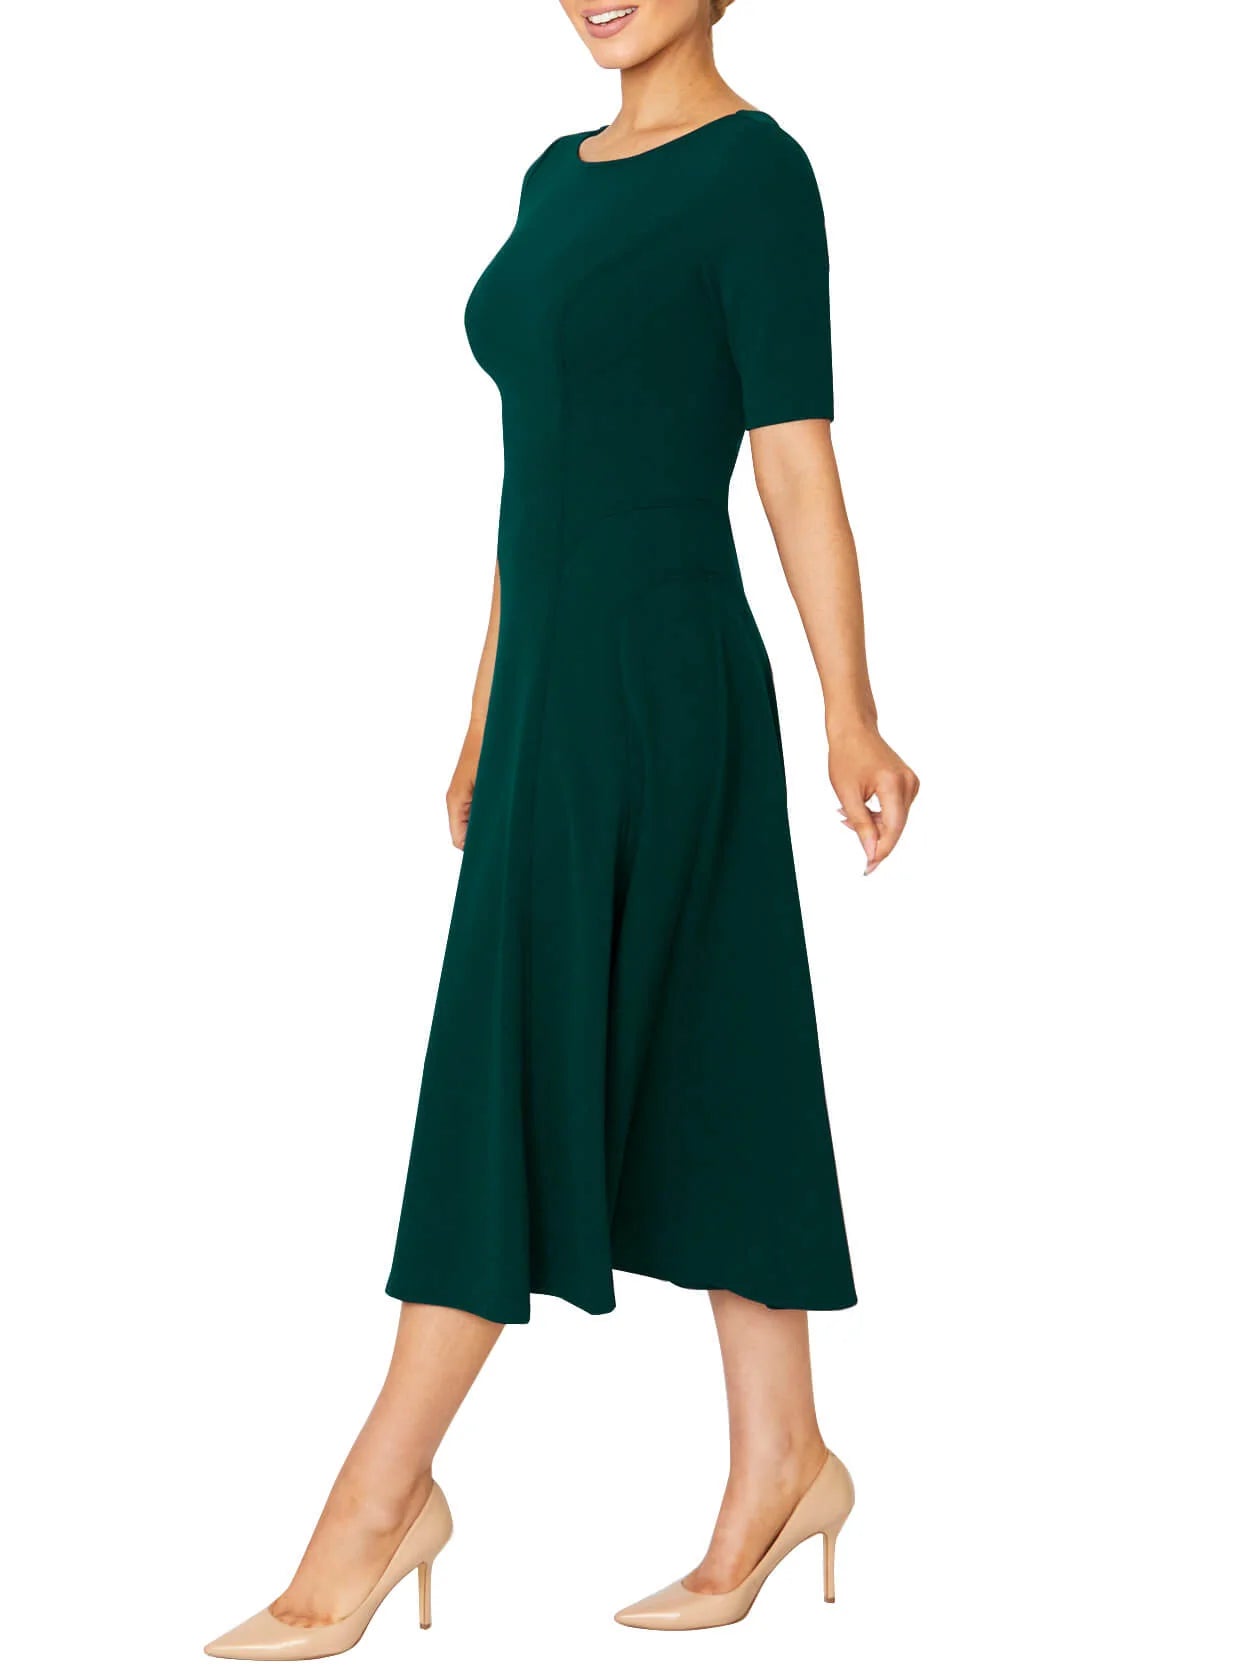 Dark Teal Stretch Scuba A-Line Dress MG16639 - After Hours Boutique